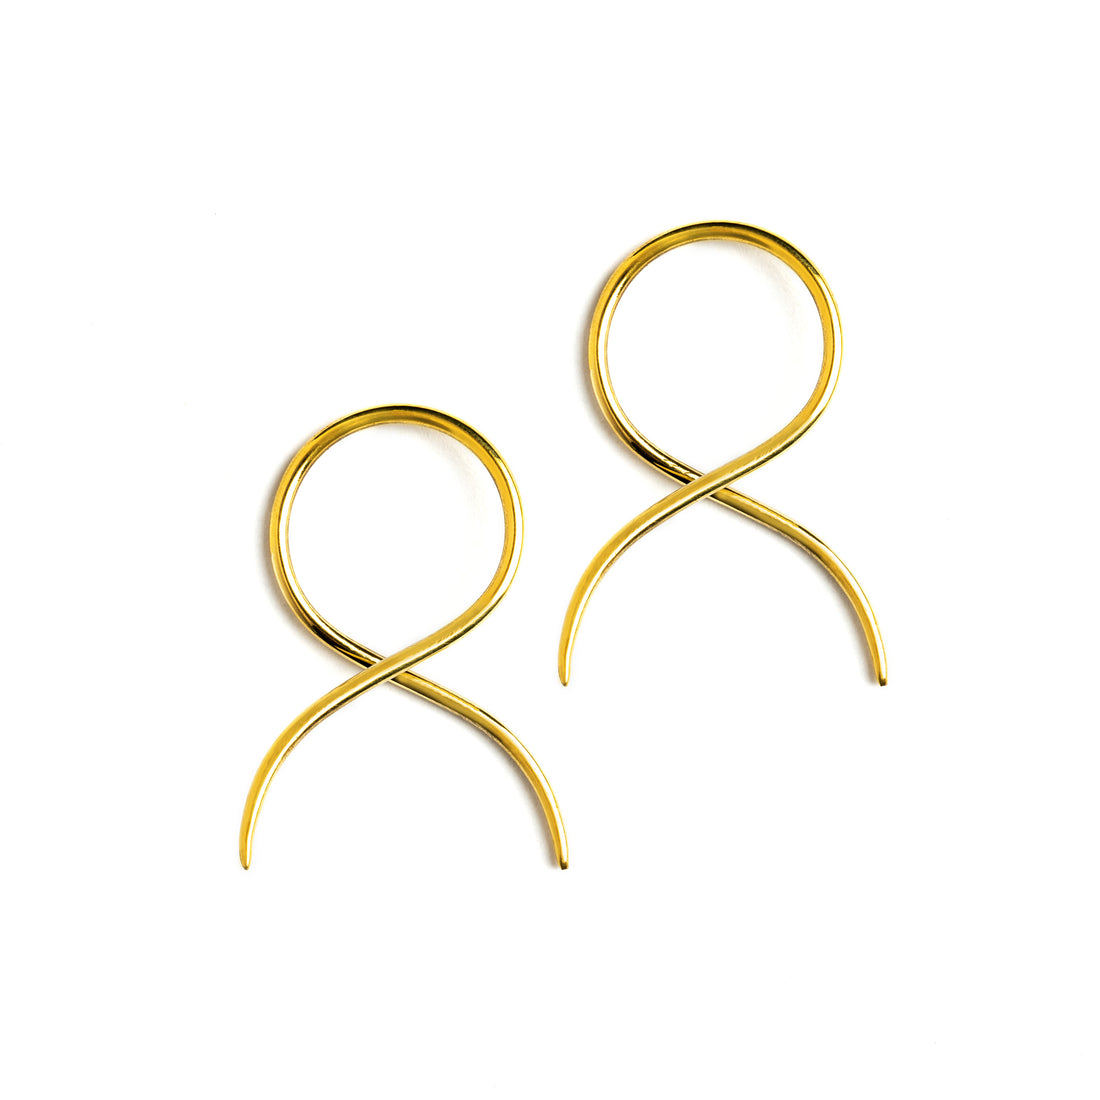 pair of golden brass wire twisted curved hook earrings side view